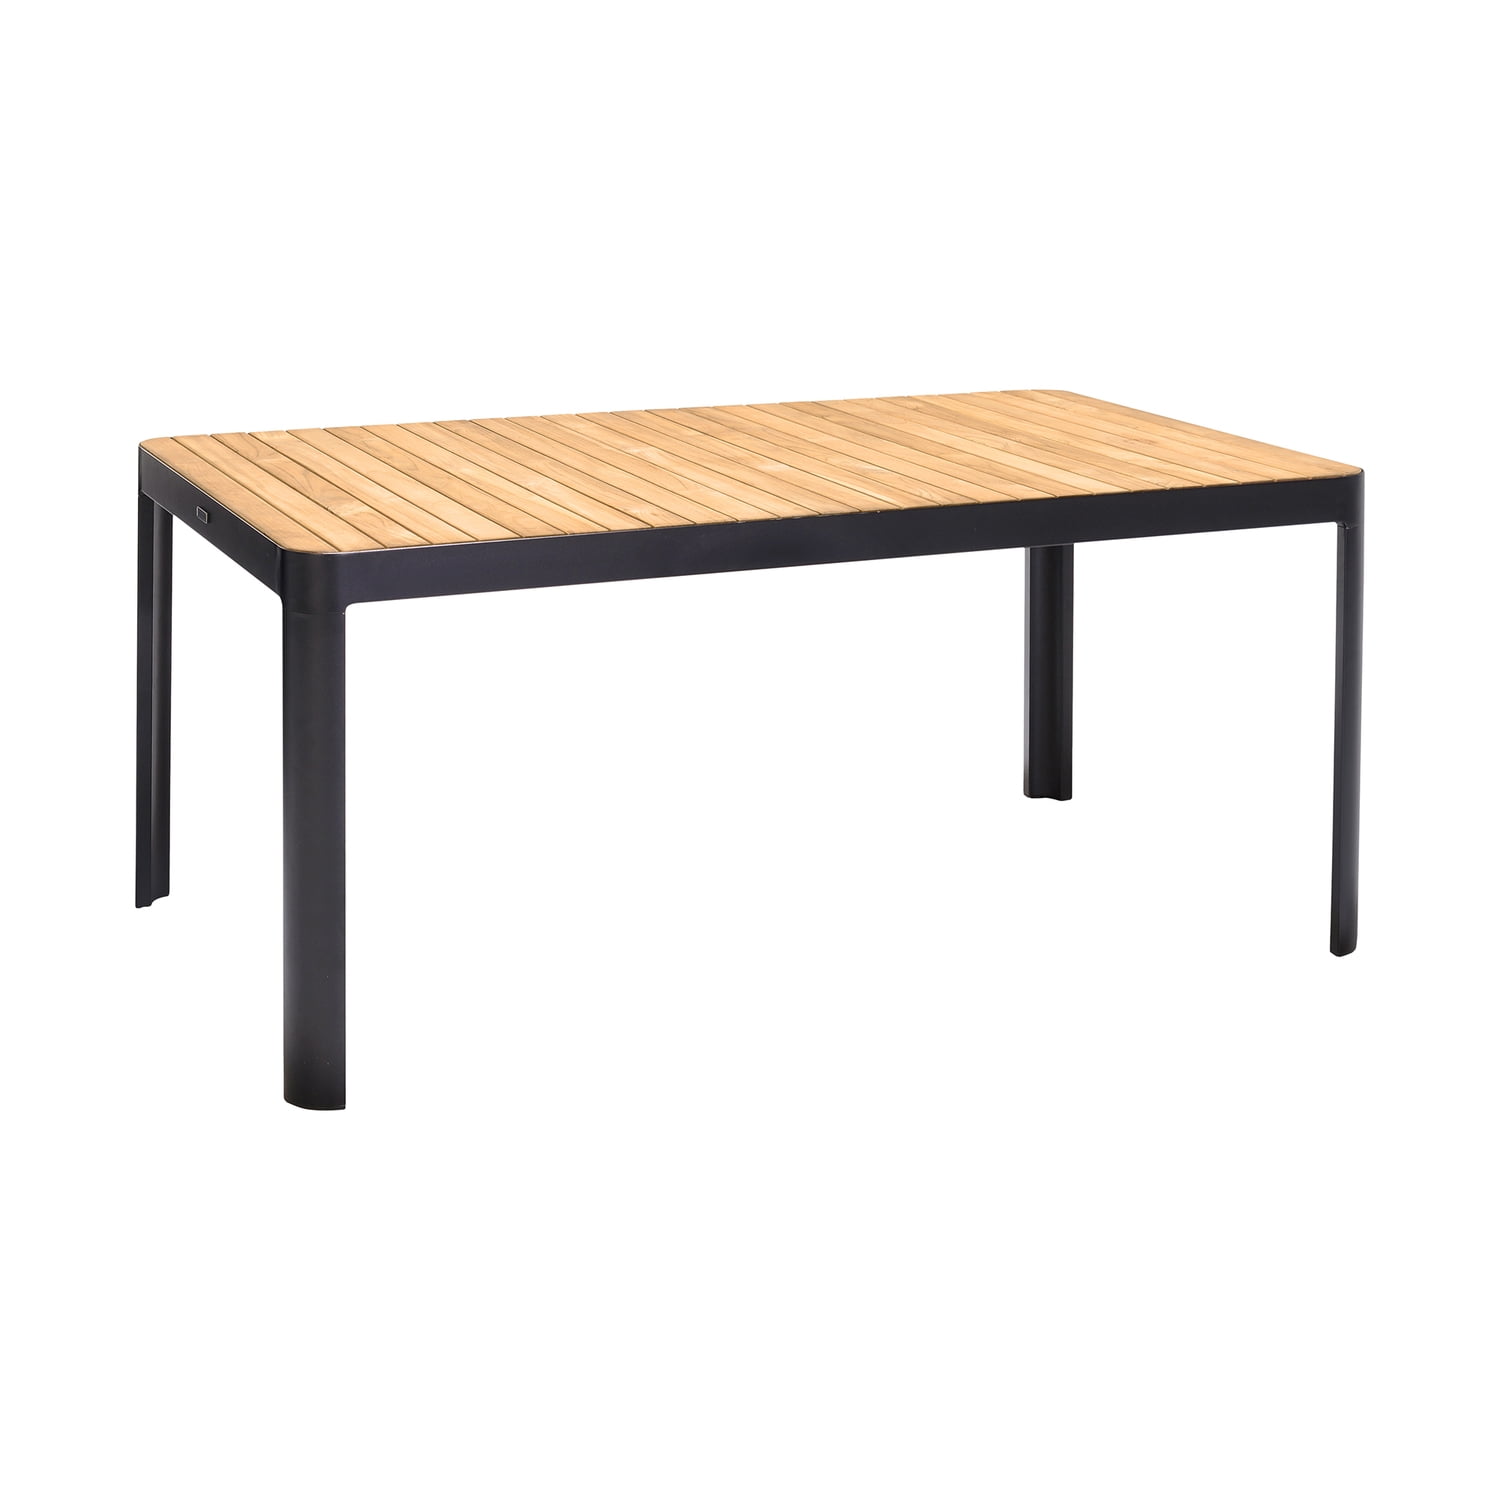 Picture of Armen Living LCPDDIBL Portals Outdoor Rectangle Dining Table in Black Finish with Natural Teak Wood Top